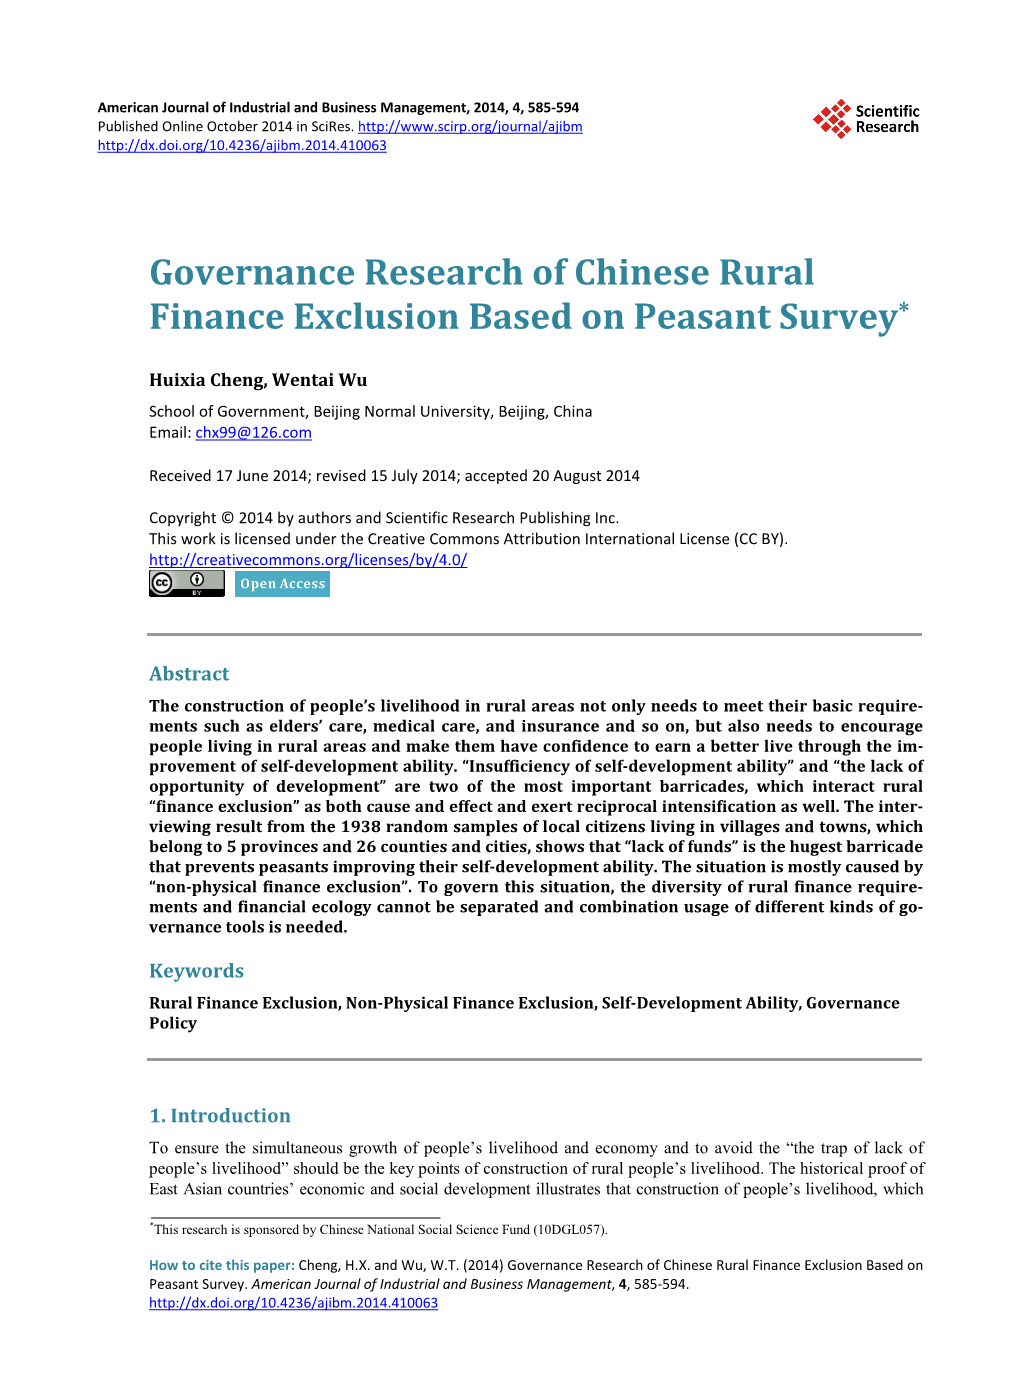 Governance Research of Chinese Rural Finance Exclusion Based on Peasant Survey*